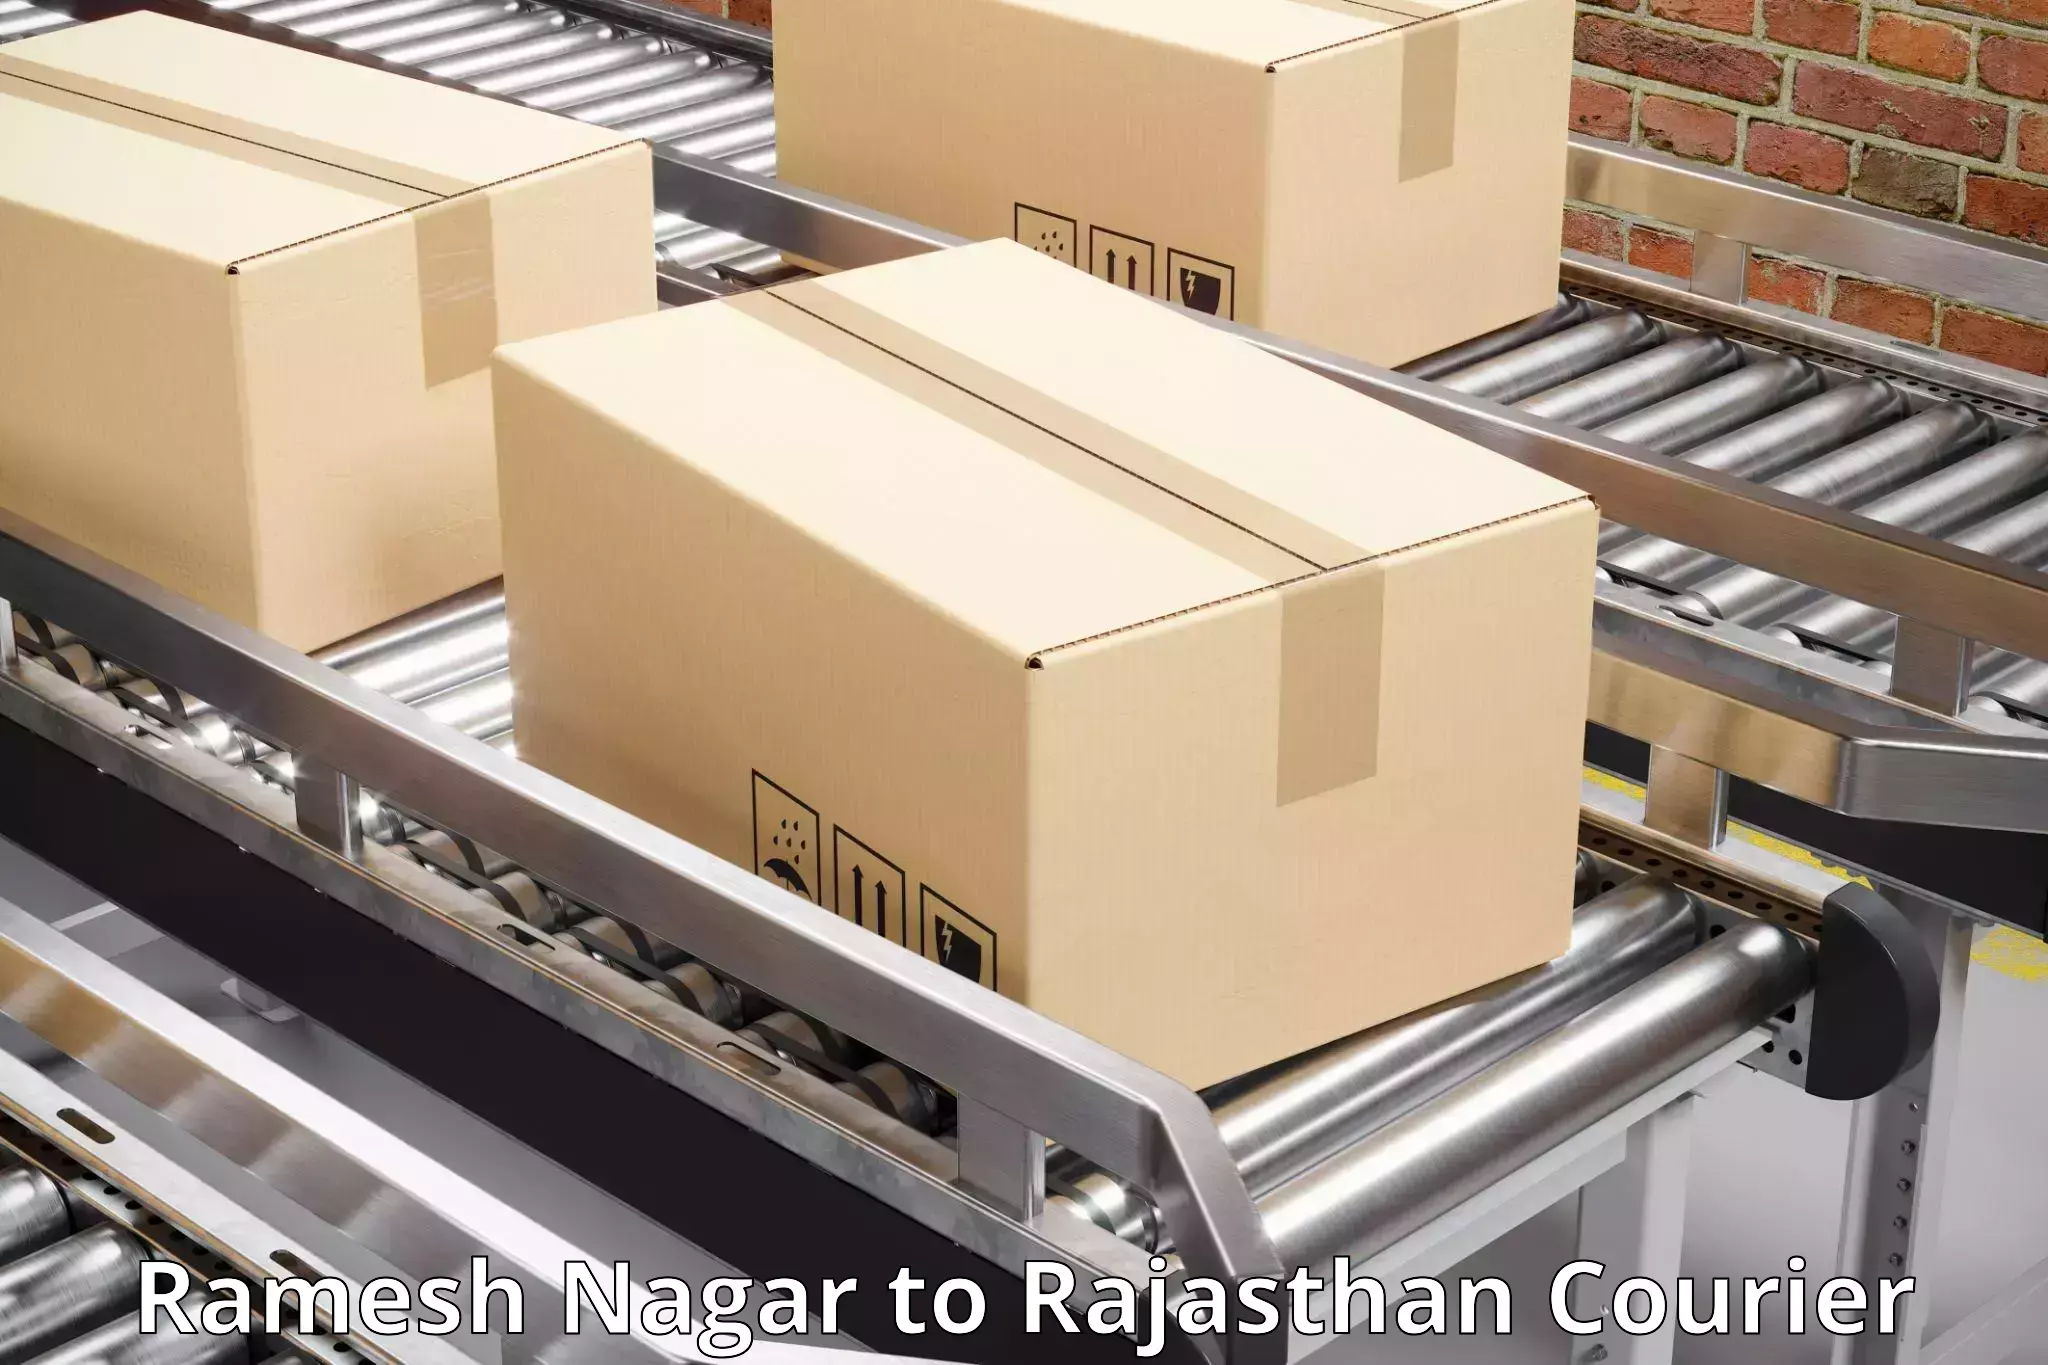 Reliable logistics providers Ramesh Nagar to Yeswanthapur